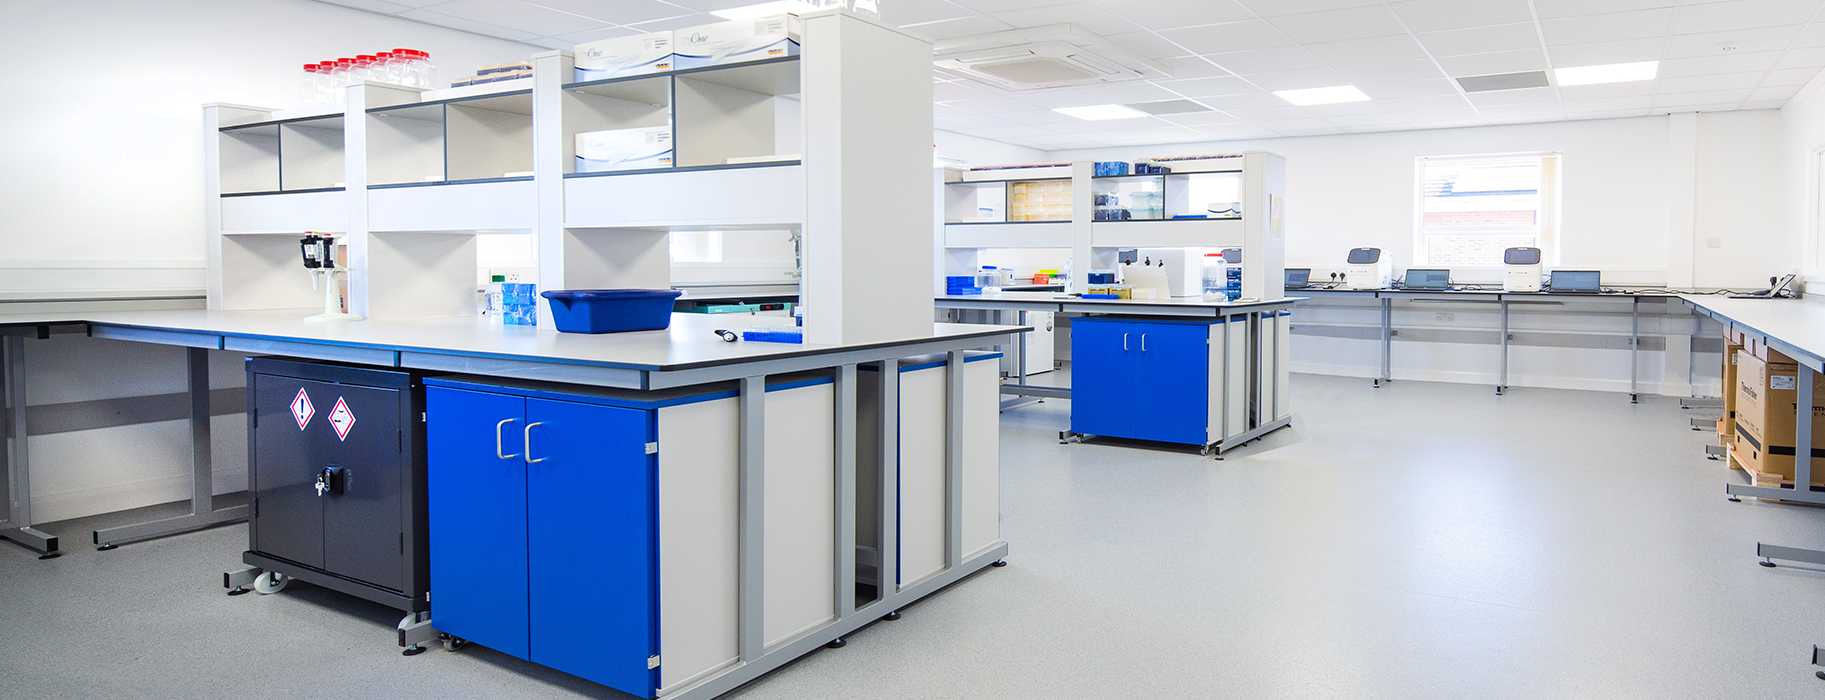 AlphaBiolabs expand their Laboratory Facility to meet the demand for their PCR Testing Service.